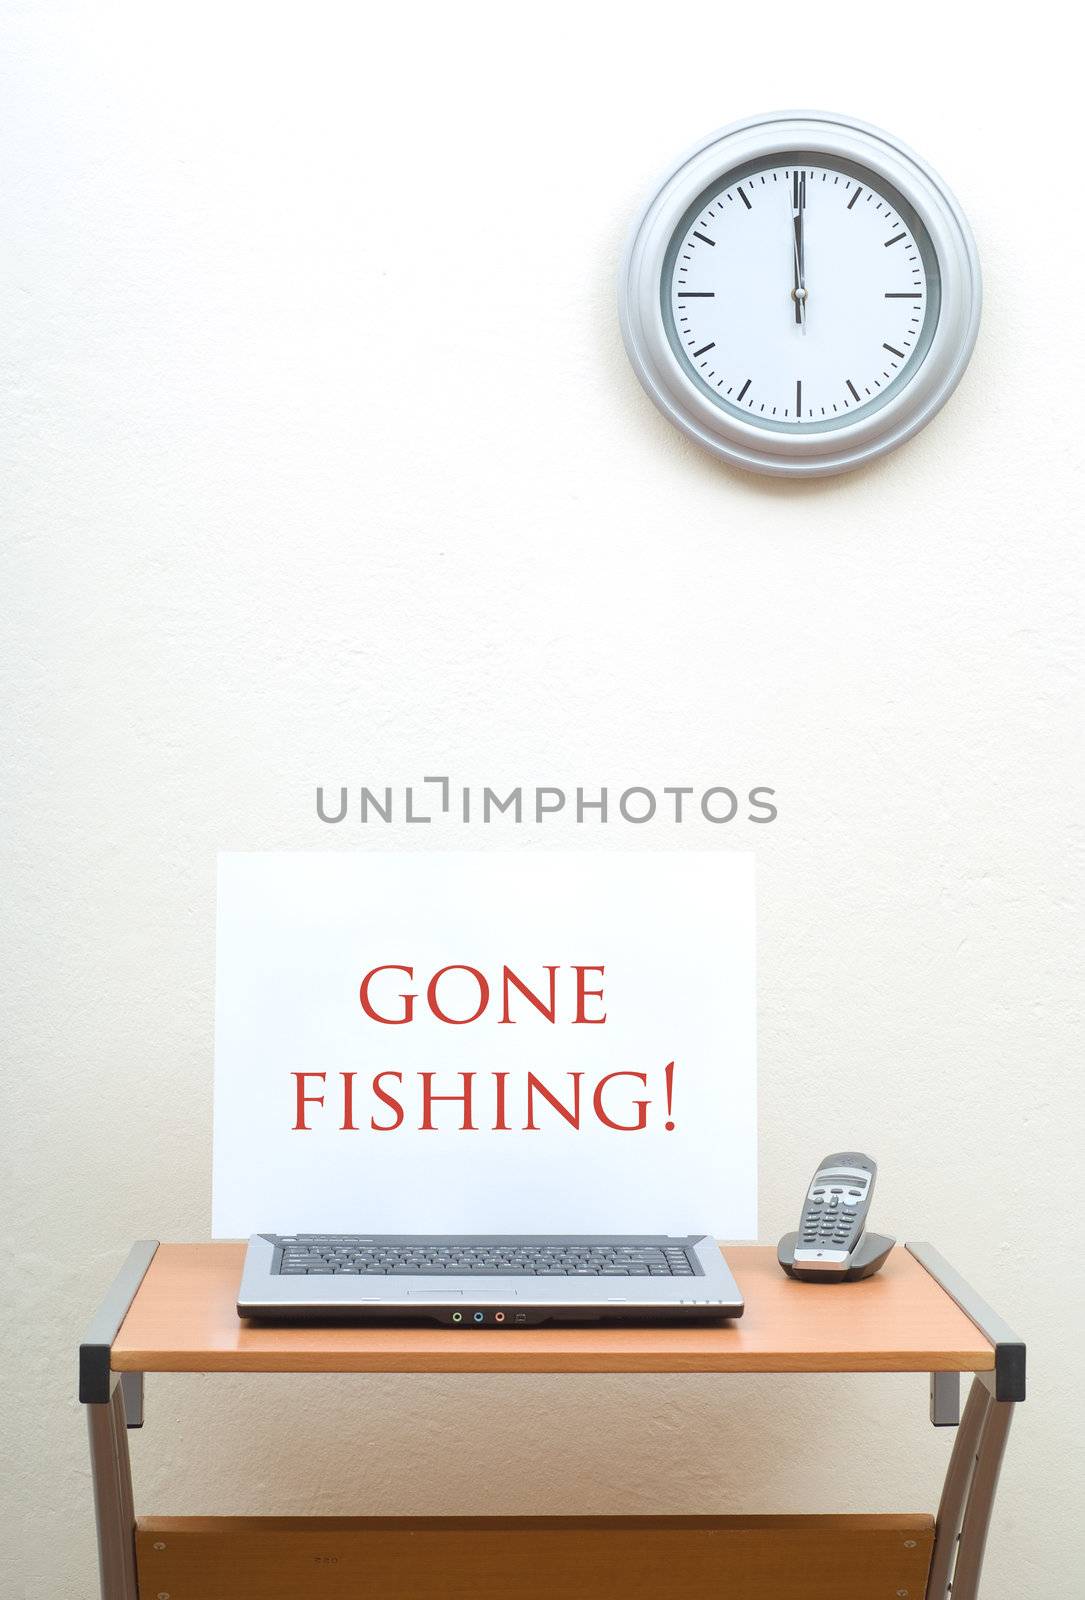 Office desk with gone fishing sign on open laptop next to portable phone, clock on wall